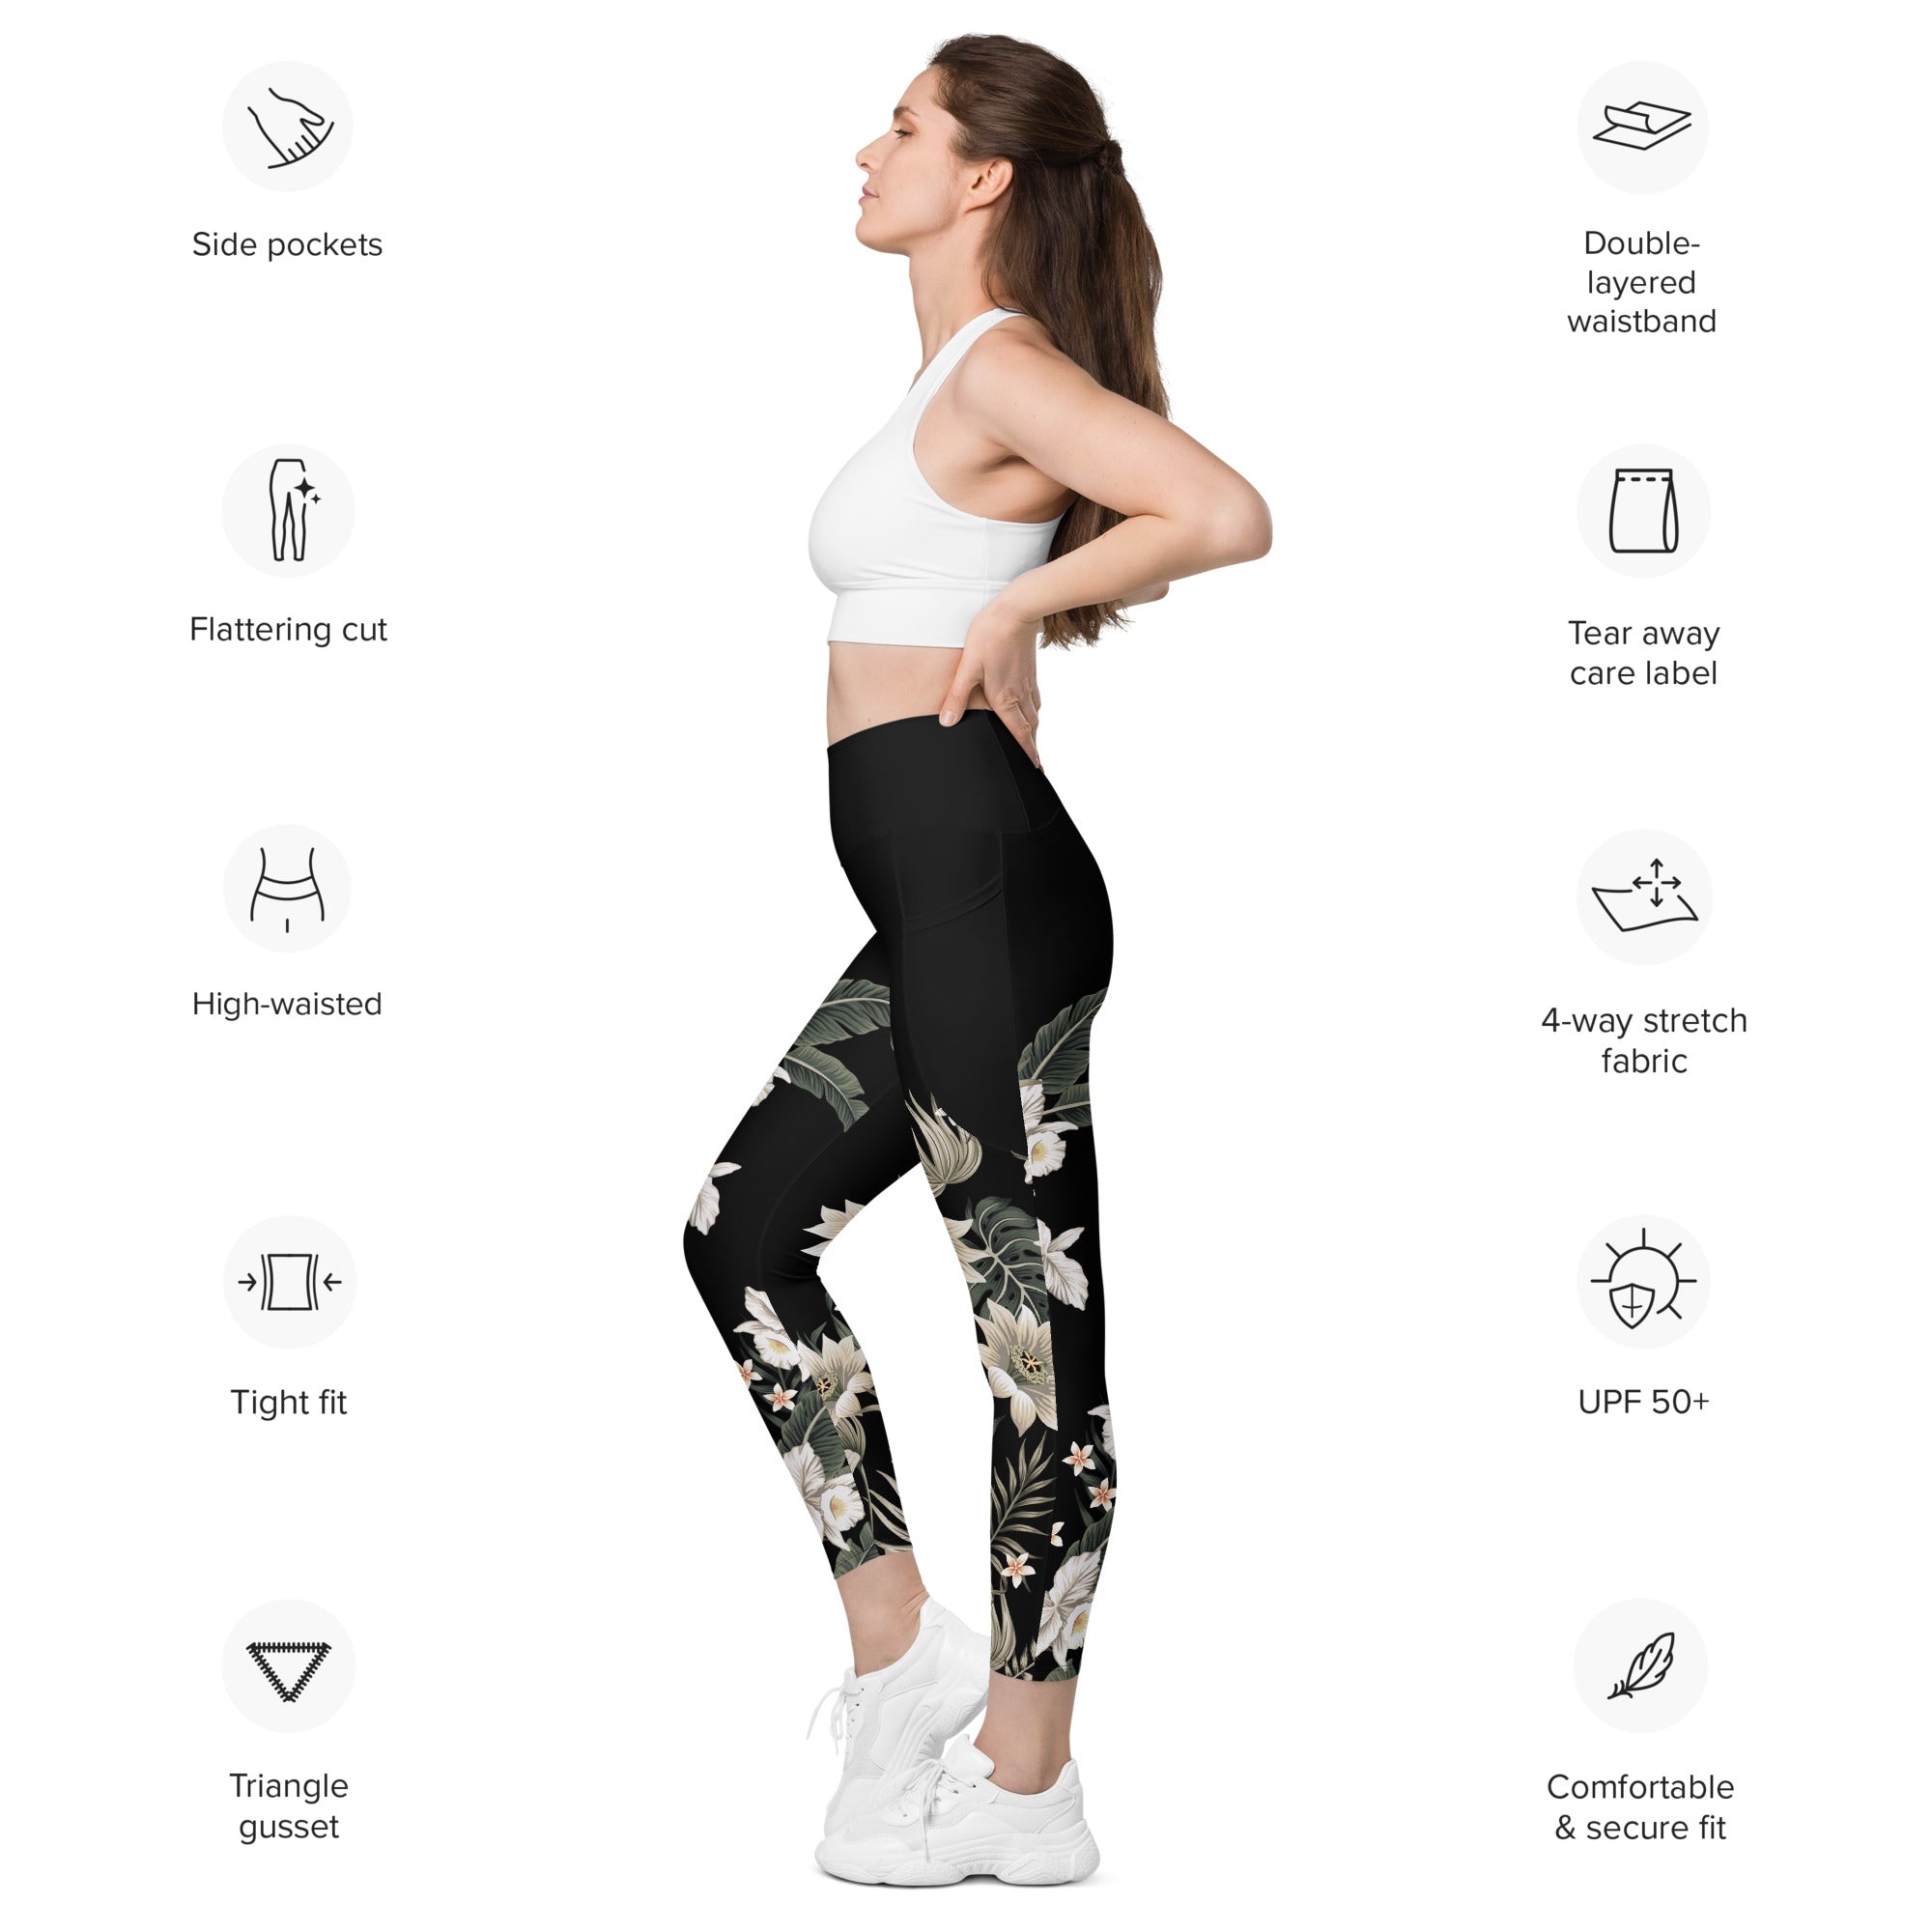 All Over Print 7/8 Women's Tights